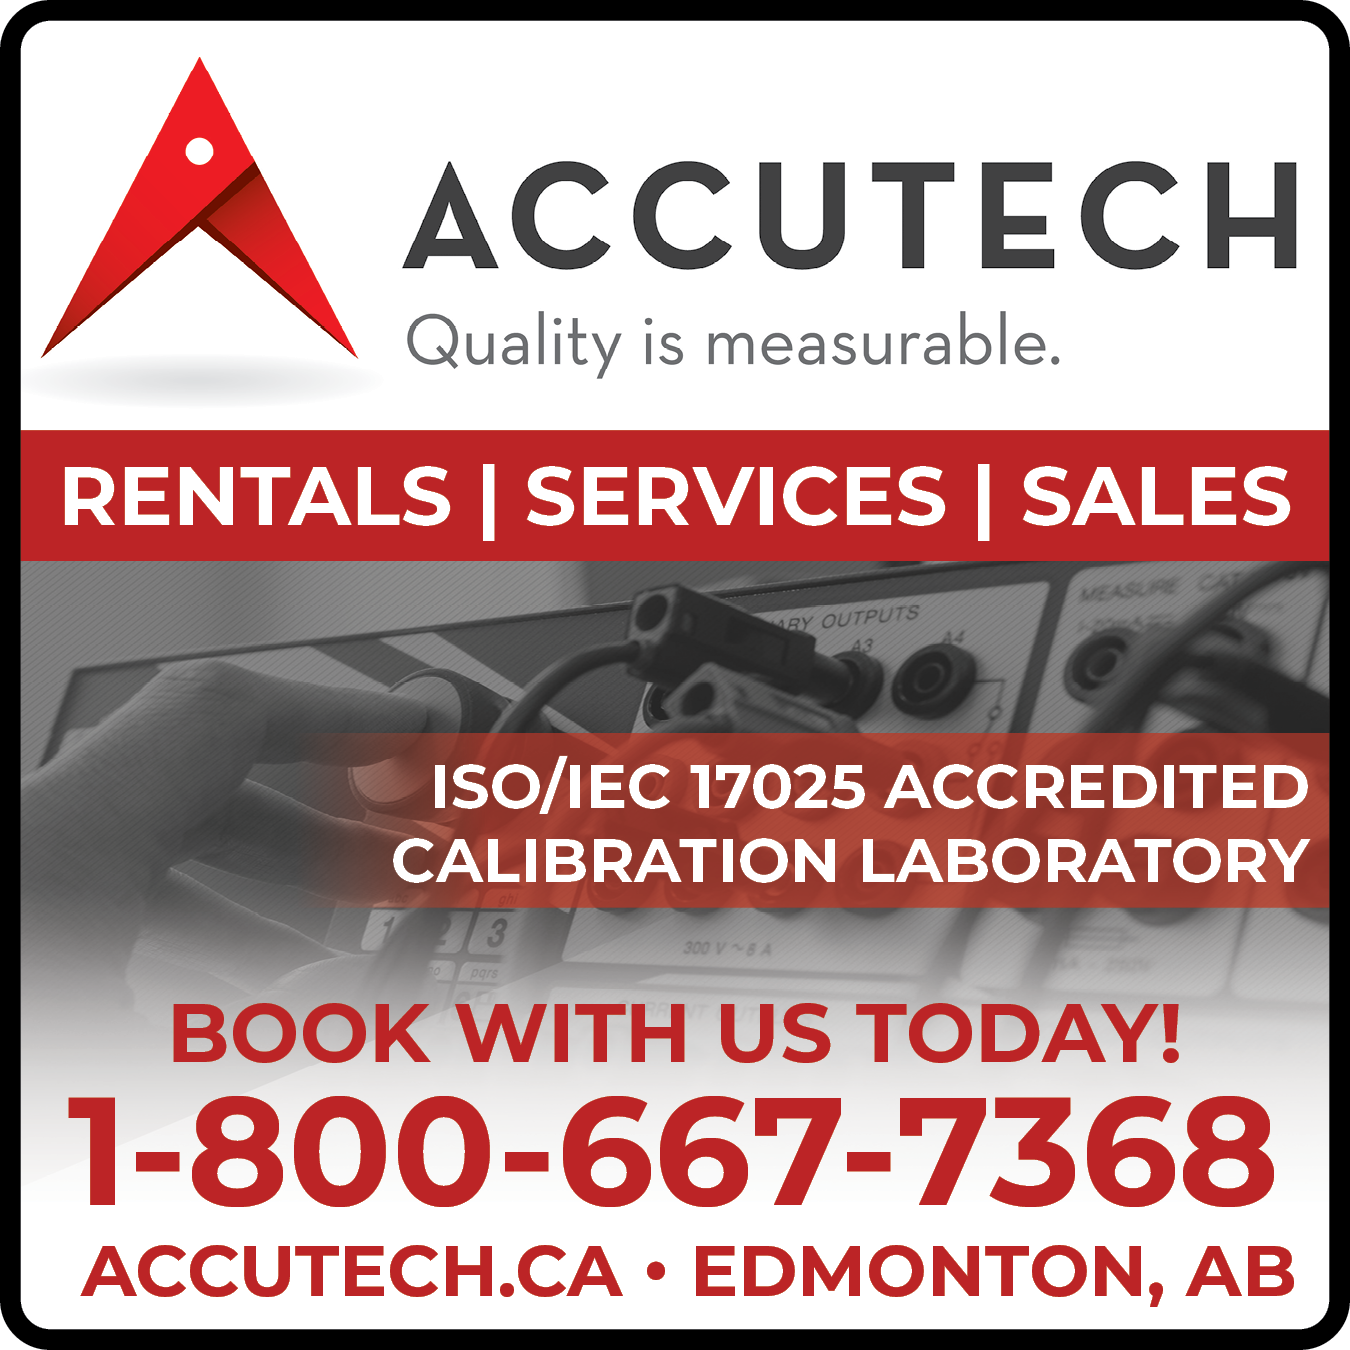 Accutech Rentals Limited